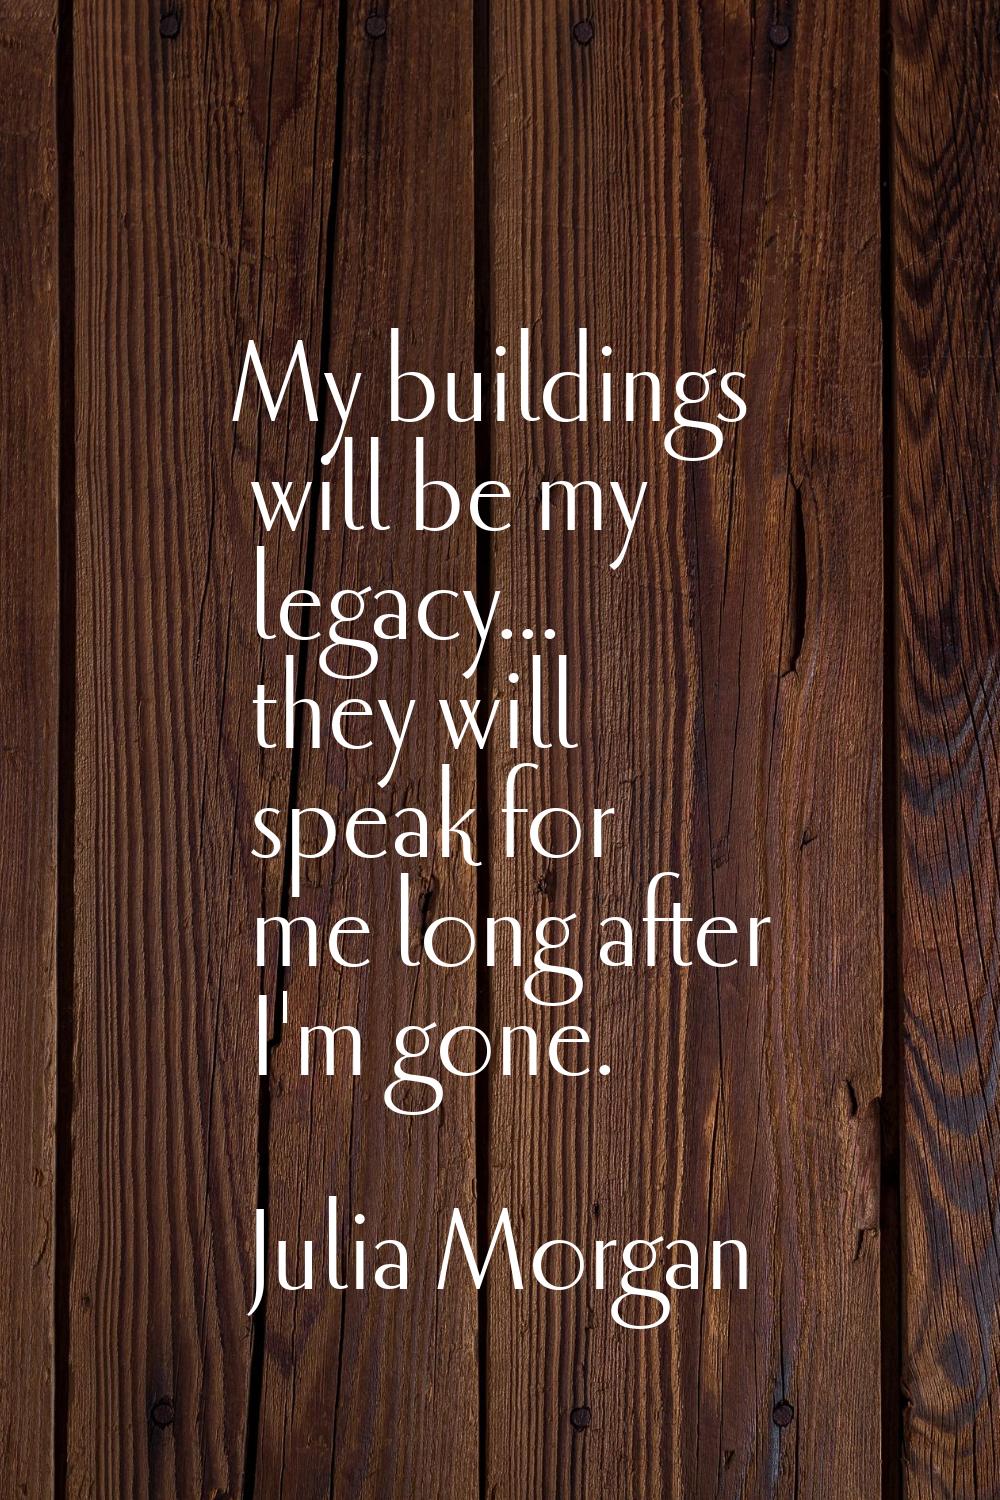 My buildings will be my legacy... they will speak for me long after I'm gone.